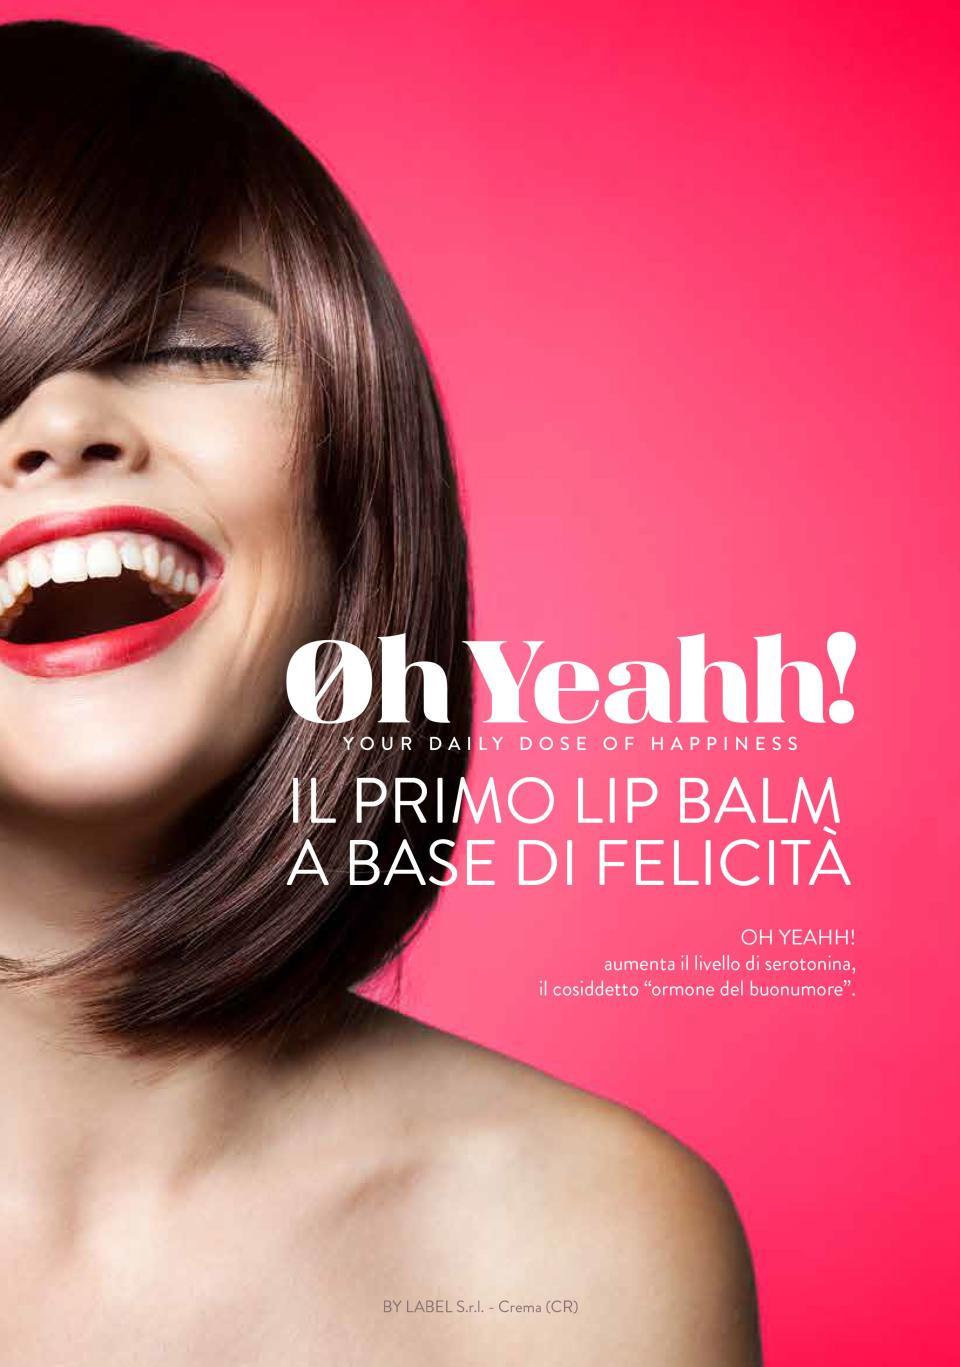 An advertisement for the brand in Italian that reads: "Il primo lip balm a base di felicità," or "the first lip balm based on happiness."